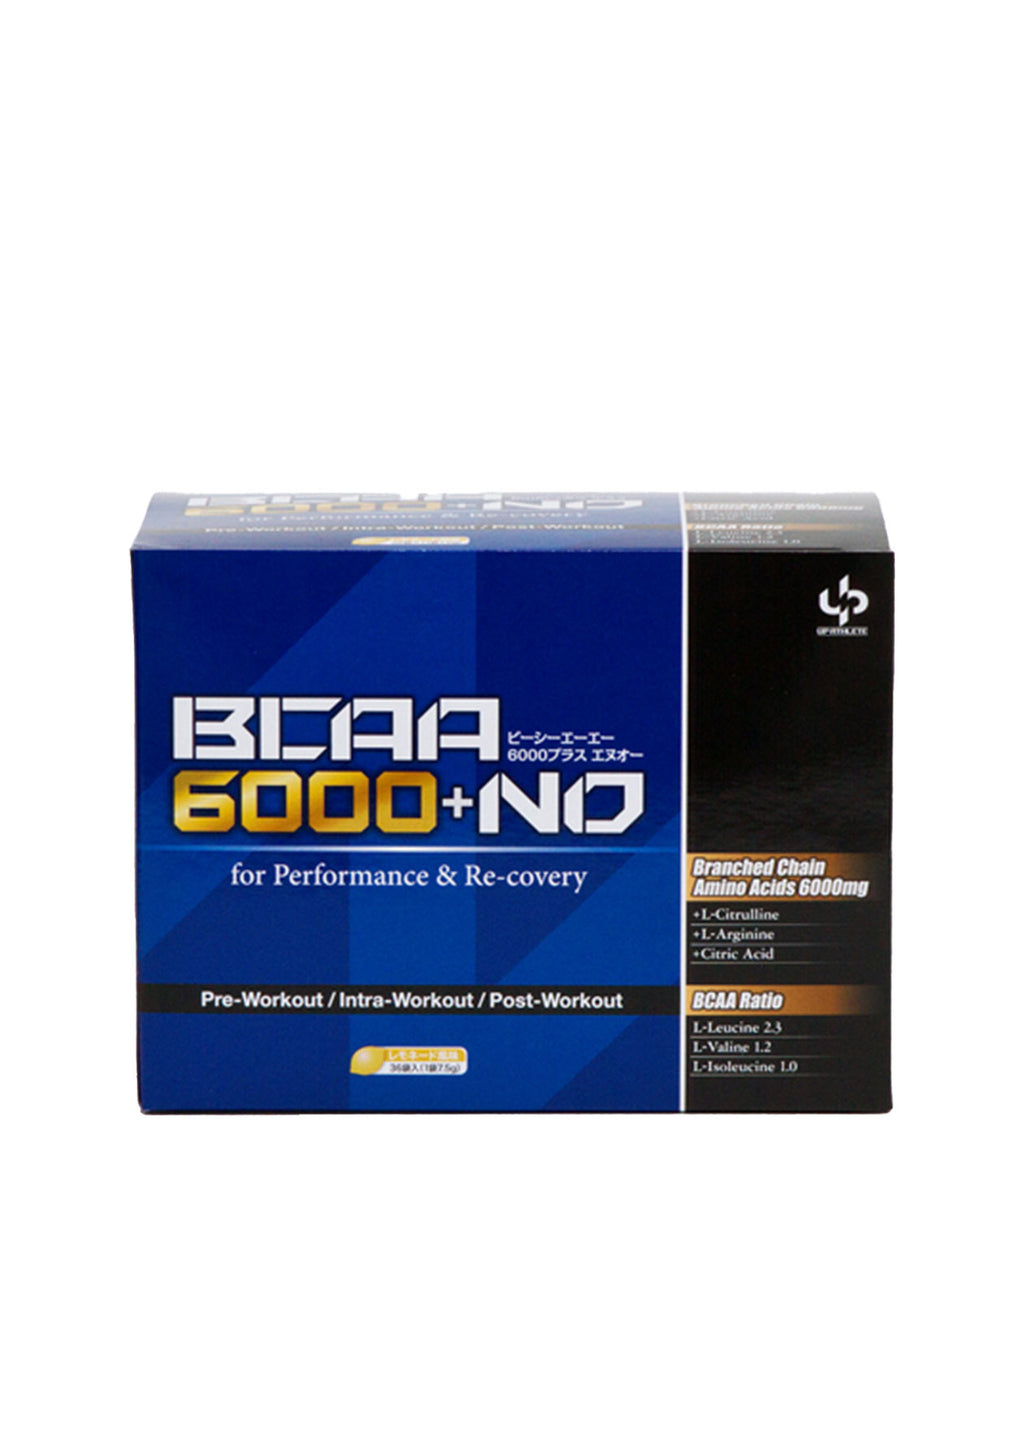 BCAA6000+NO for Performance & Recovery